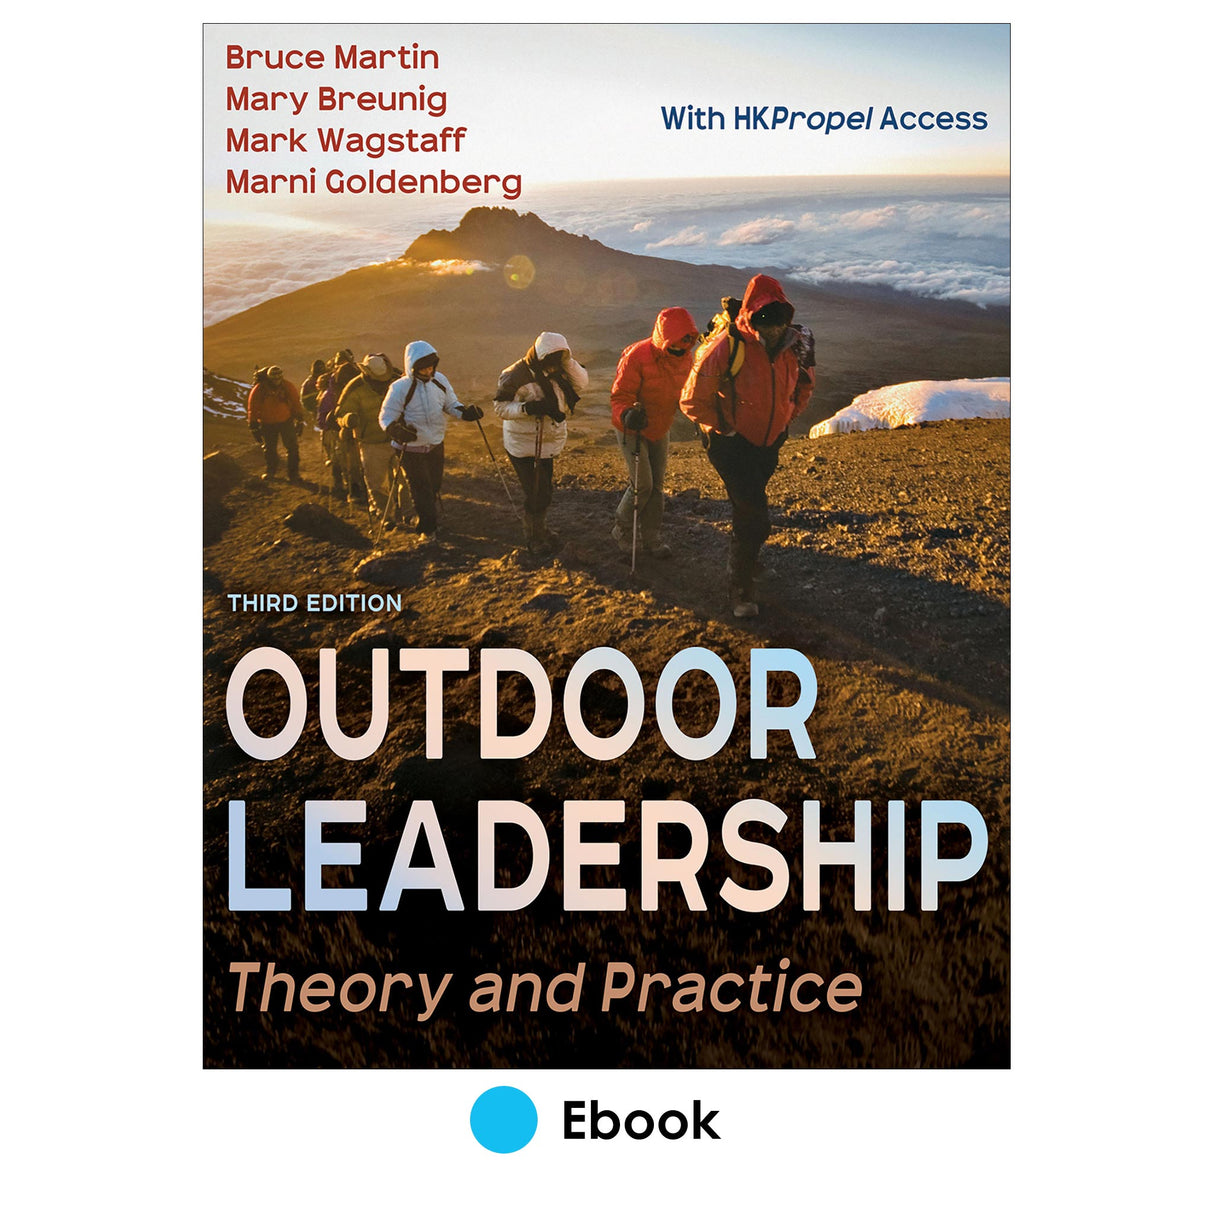 Outdoor Leadership 3rd Edition Ebook With HKPropel Access